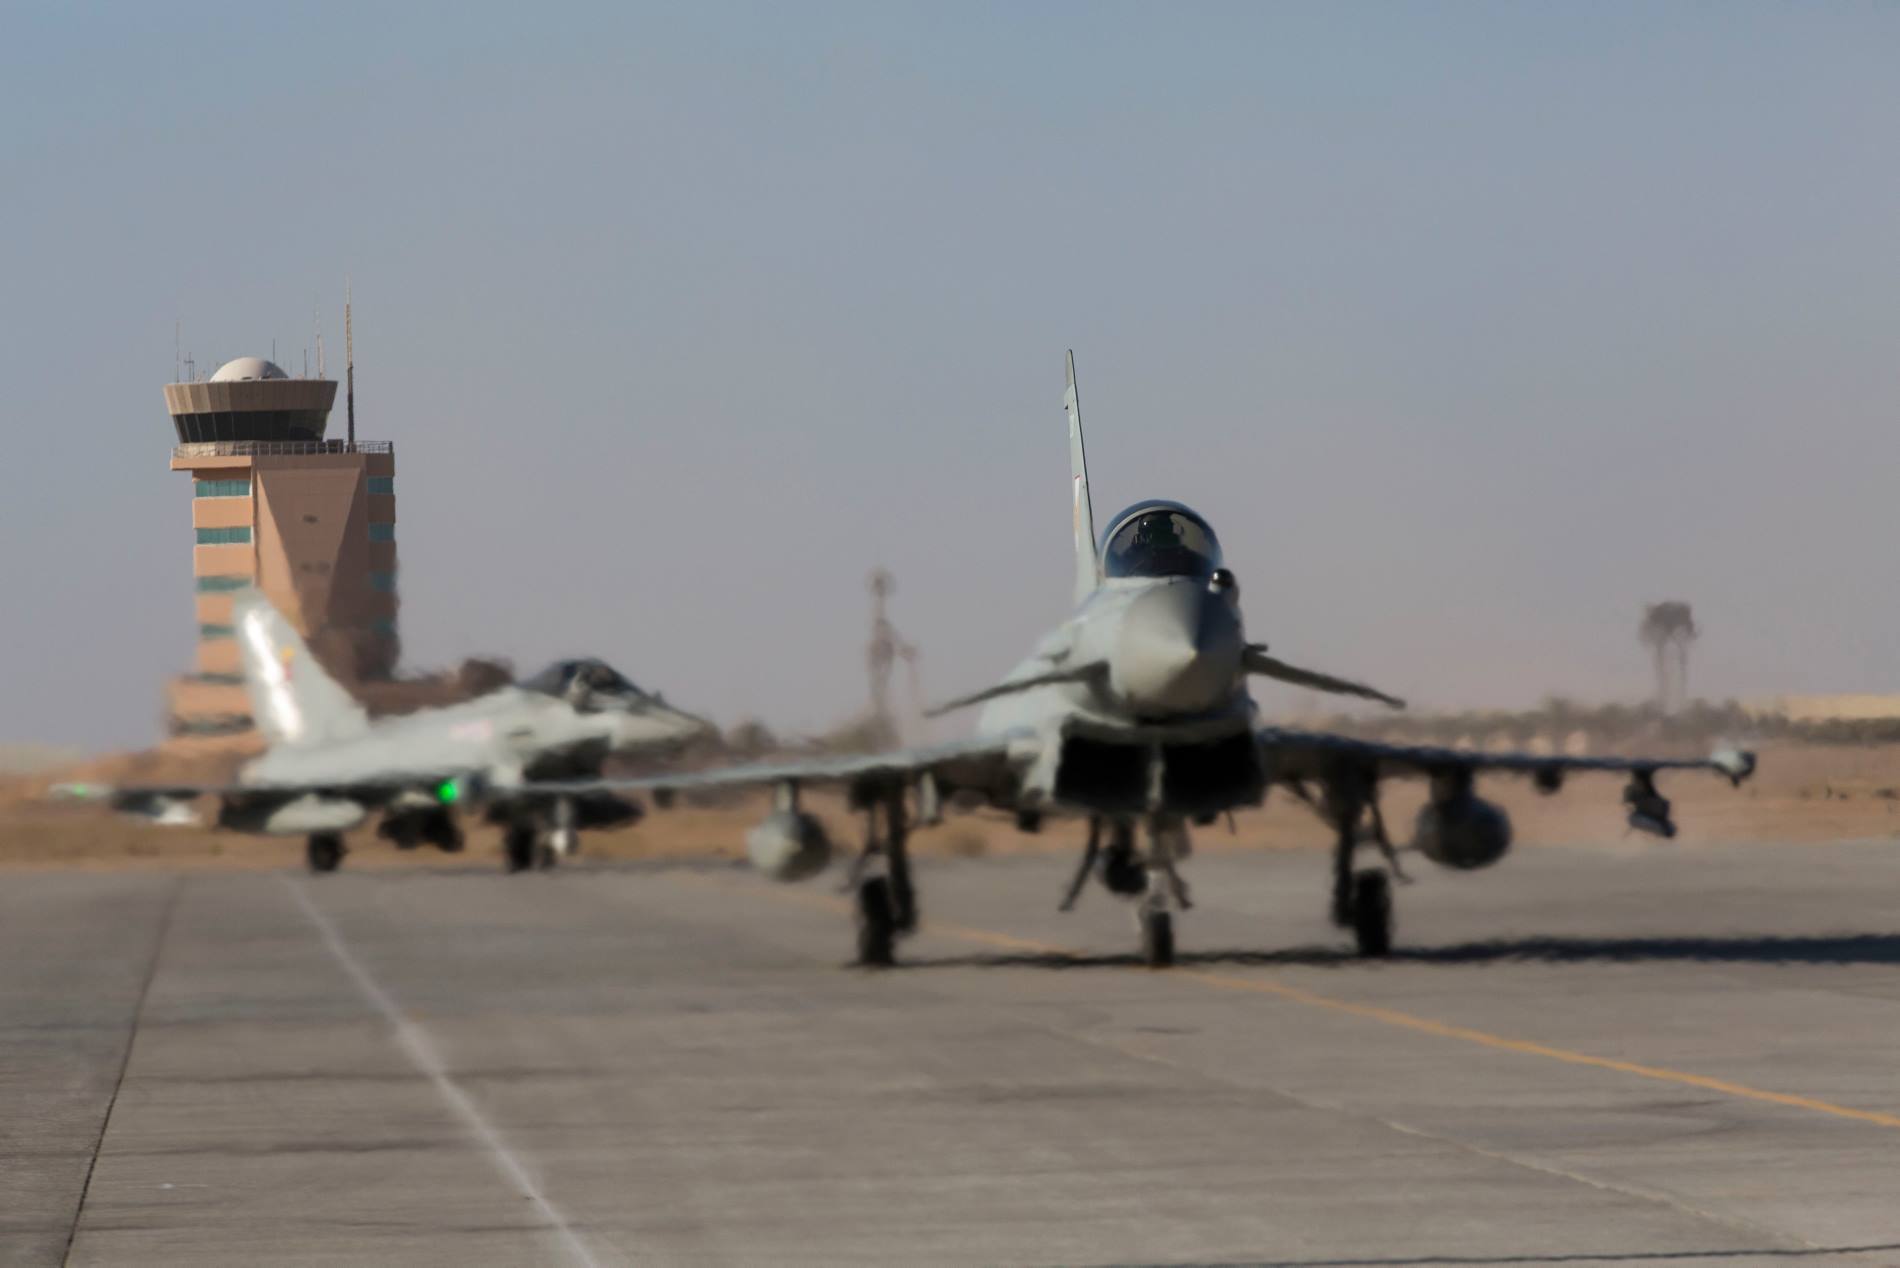 Typhoons arrive in Oman.
Picture credit: RAF Lossiemouth